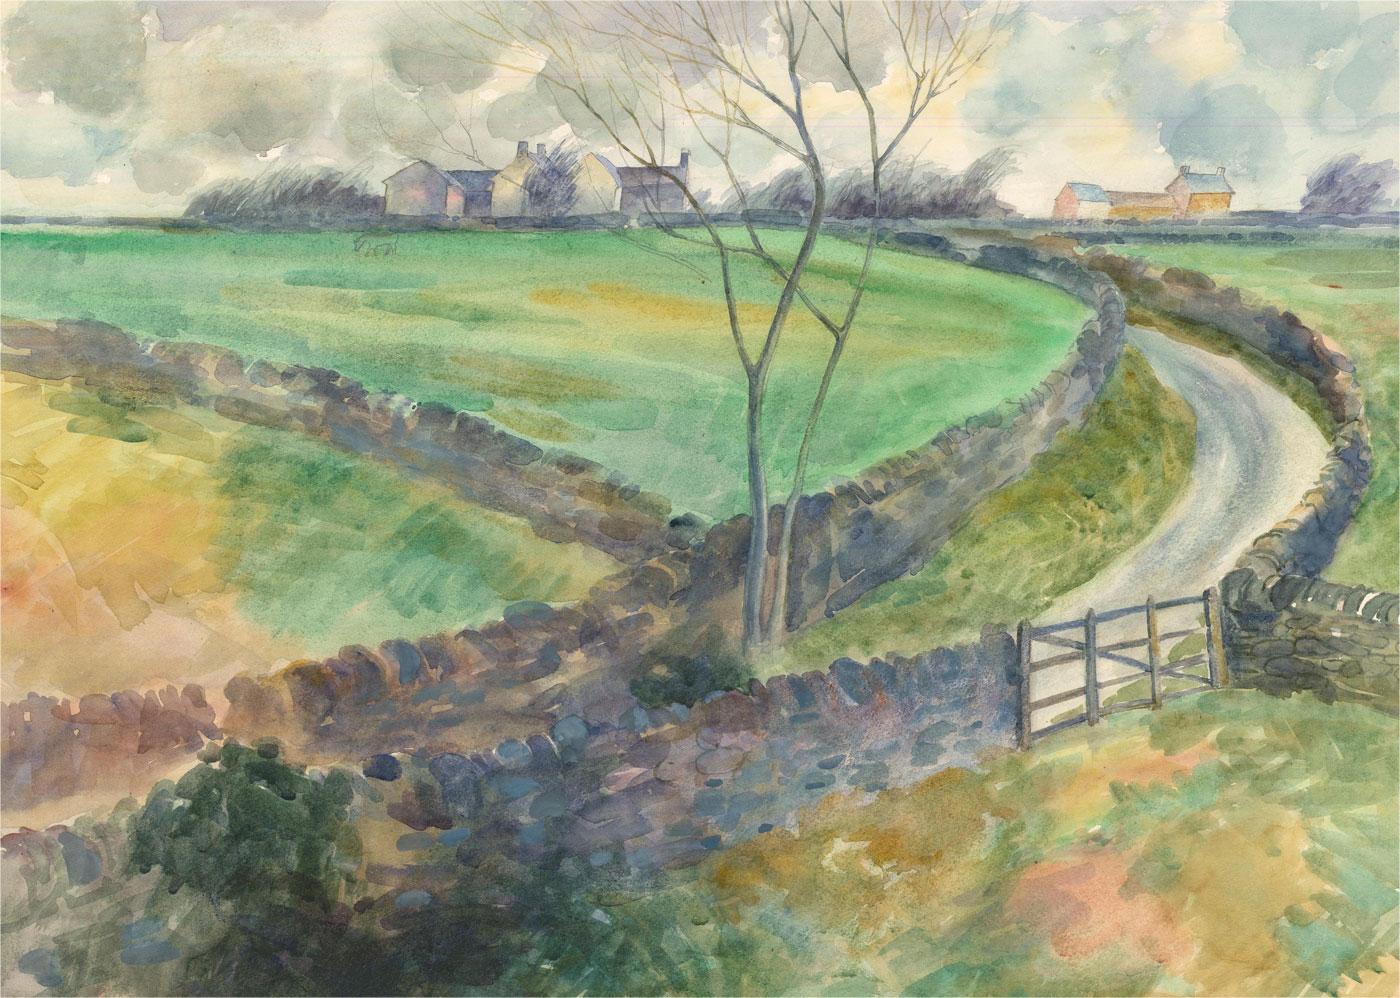 A wonderful watercolour study by the British artist and gallery owner Frank Constantine. Here the artist has captured empty playing fields on a drizzly day in early spring. Signed and inscribed with the title to the lower right. On watercolour paper.